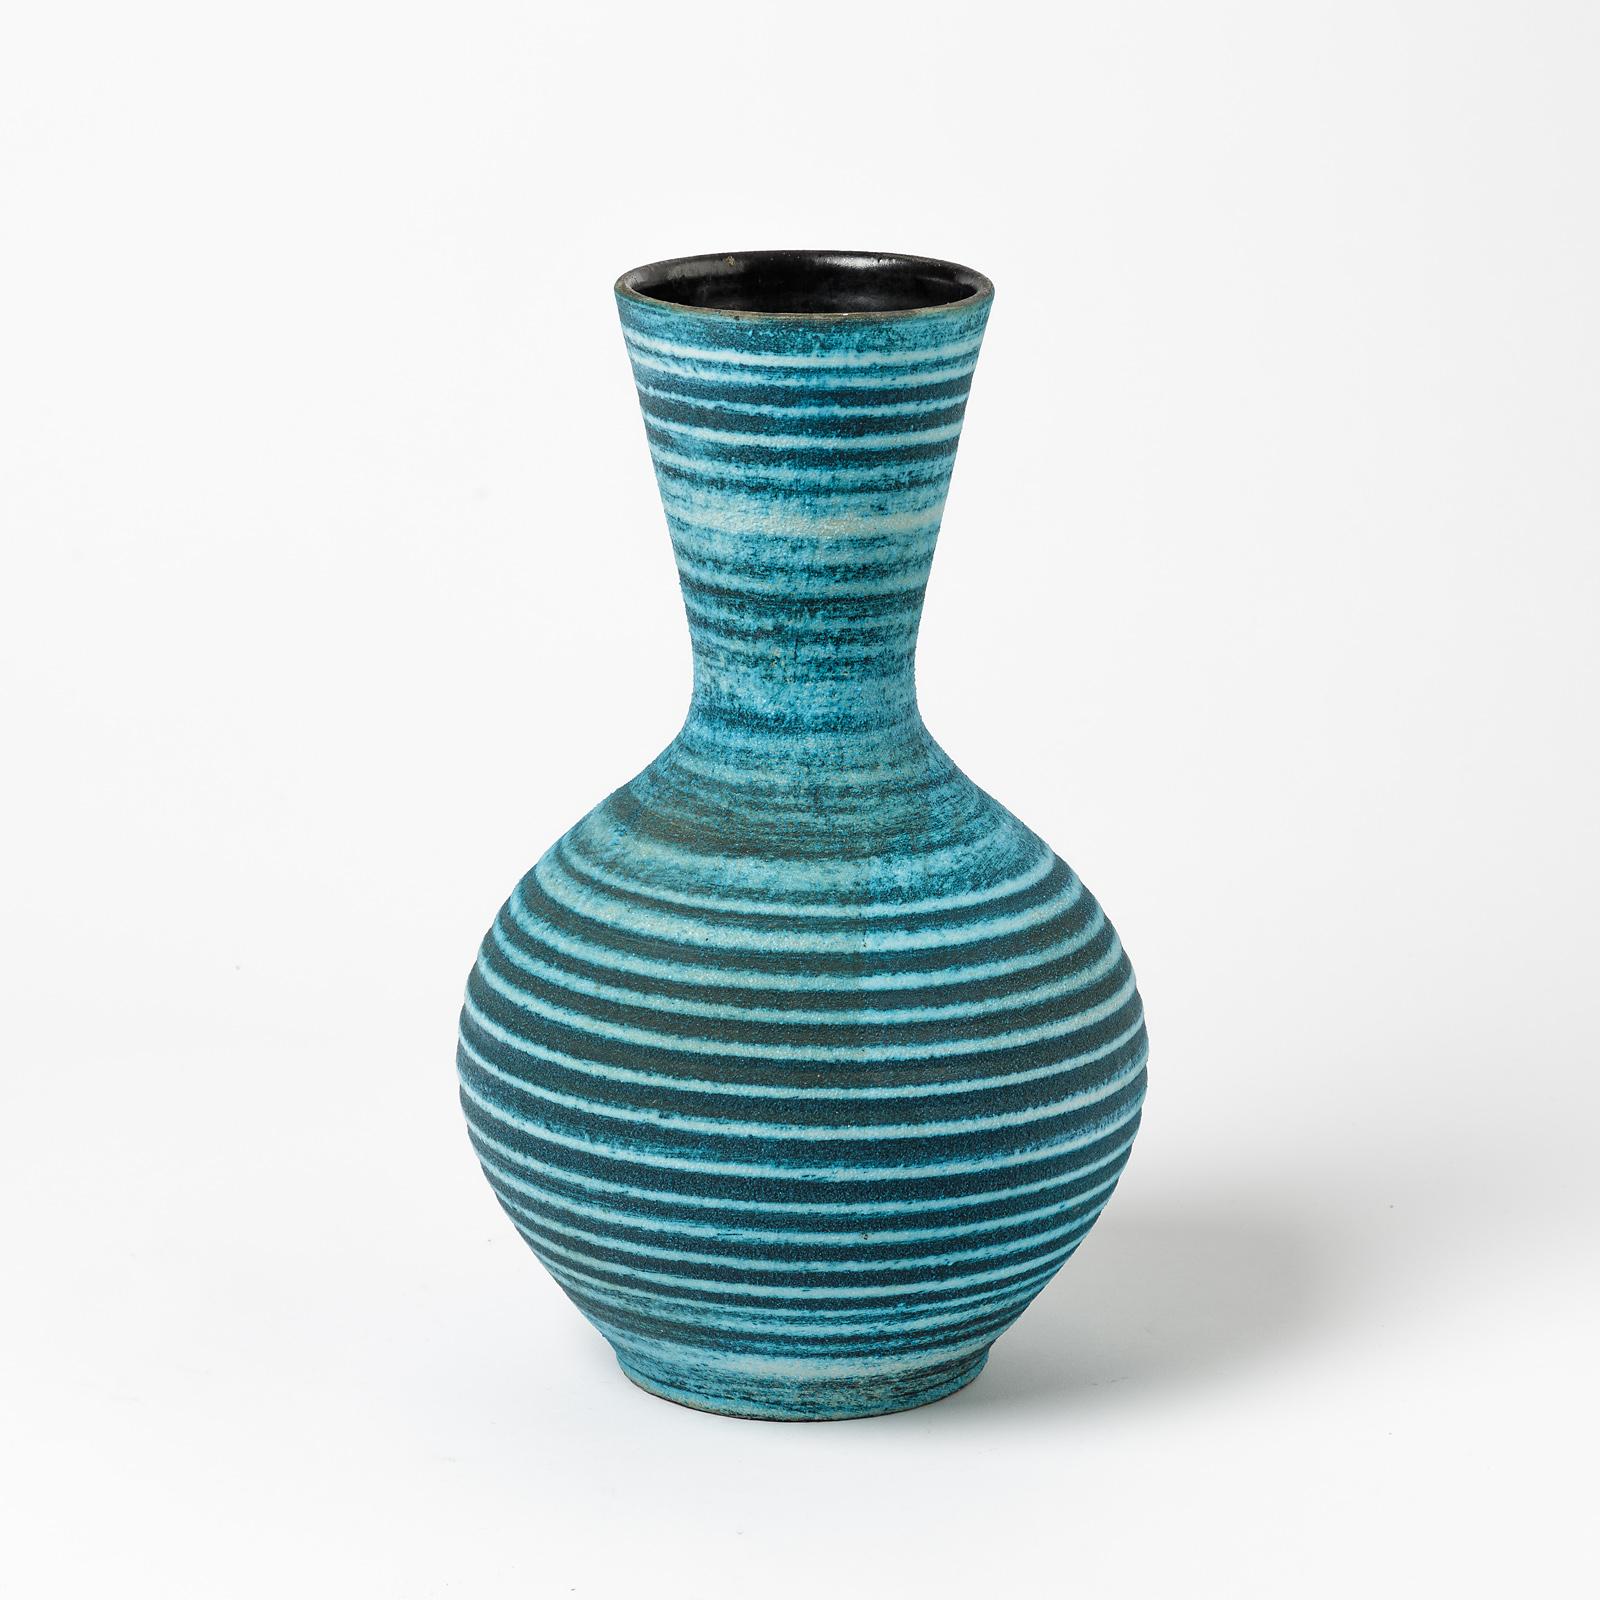 A ceramic vase with blue glaze decoration by Accolay.
Perfect original conditions.
Signed 